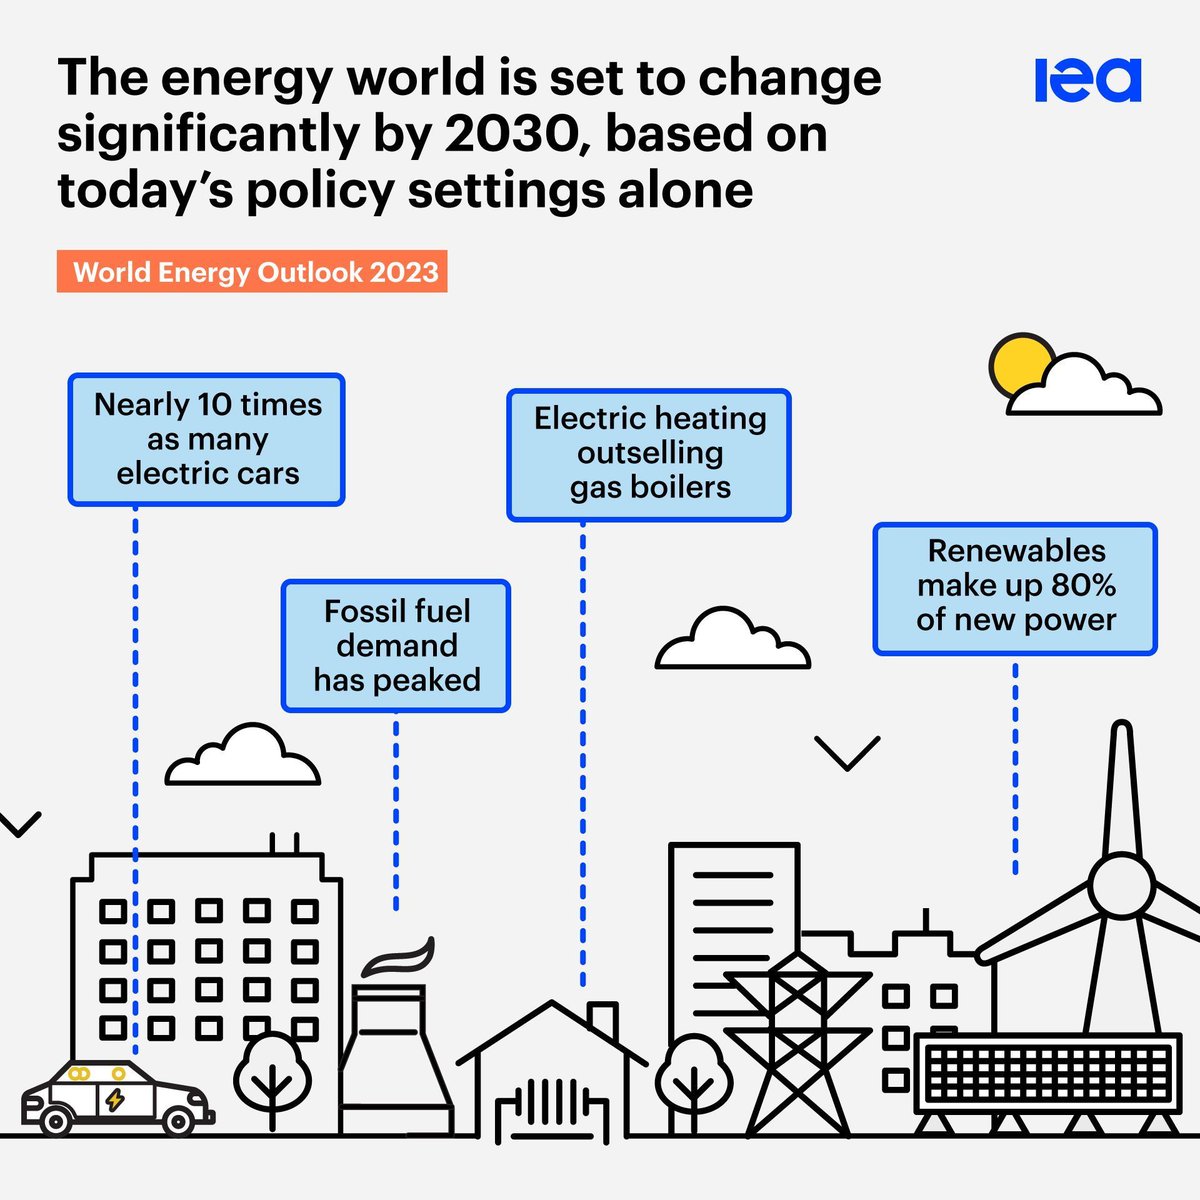 The energy world will look very different by 2030, even under today's policy settings 🚗 Nearly 10 times as many electric cars ☀️ Renewables = 80% of new power ⚡️ Electric heating outselling fossil fuel boilers 🏭 Fossil fuel demand has peaked More ➡️ iea.li/48gqh3E